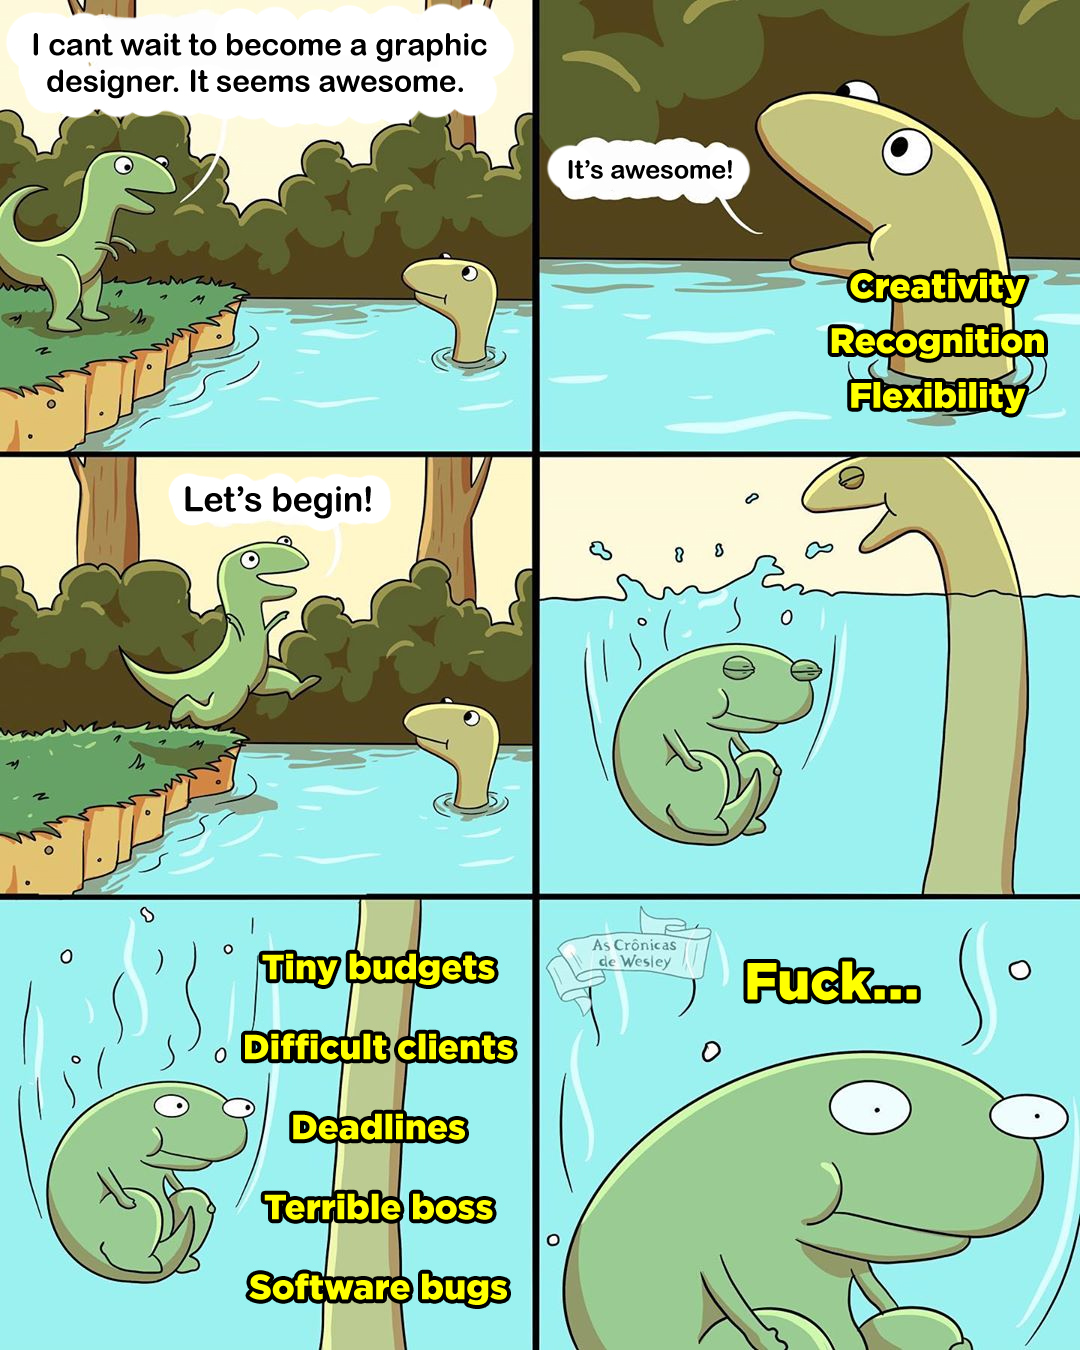 I can't wait to be a graphic designer - Dinosaur water jump